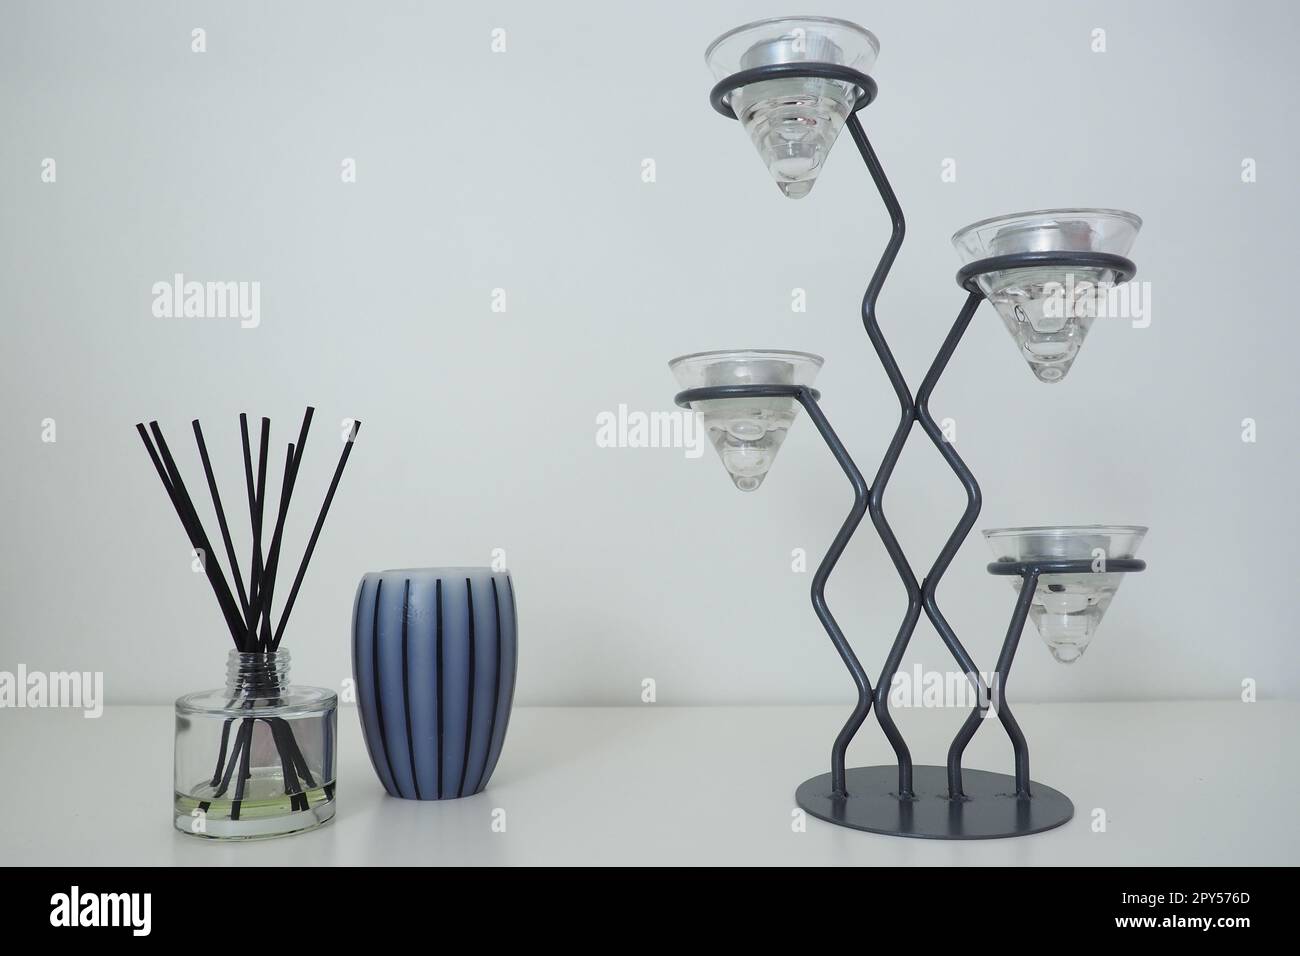 Tall metal chandelier with glass holders for small candles. White background. Incense sticks in a glass cubic vessel with essential oil. Interior decor. Scented gray striped candle or vase. Stock Photo